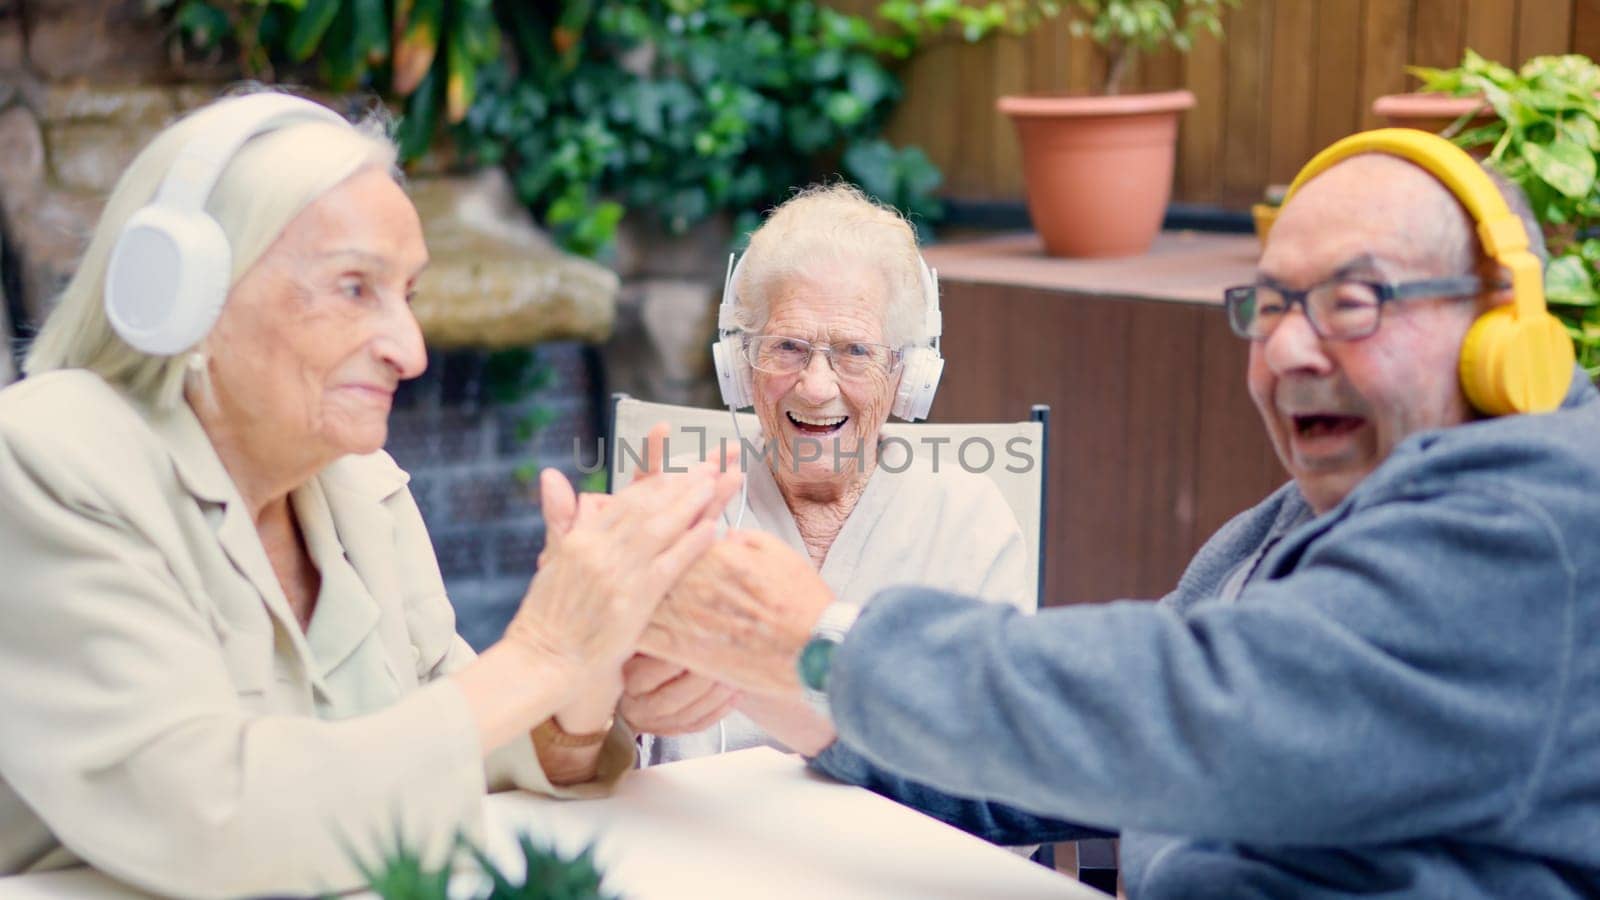 Photo of three senior people celebrating and greeting together in a geriatric